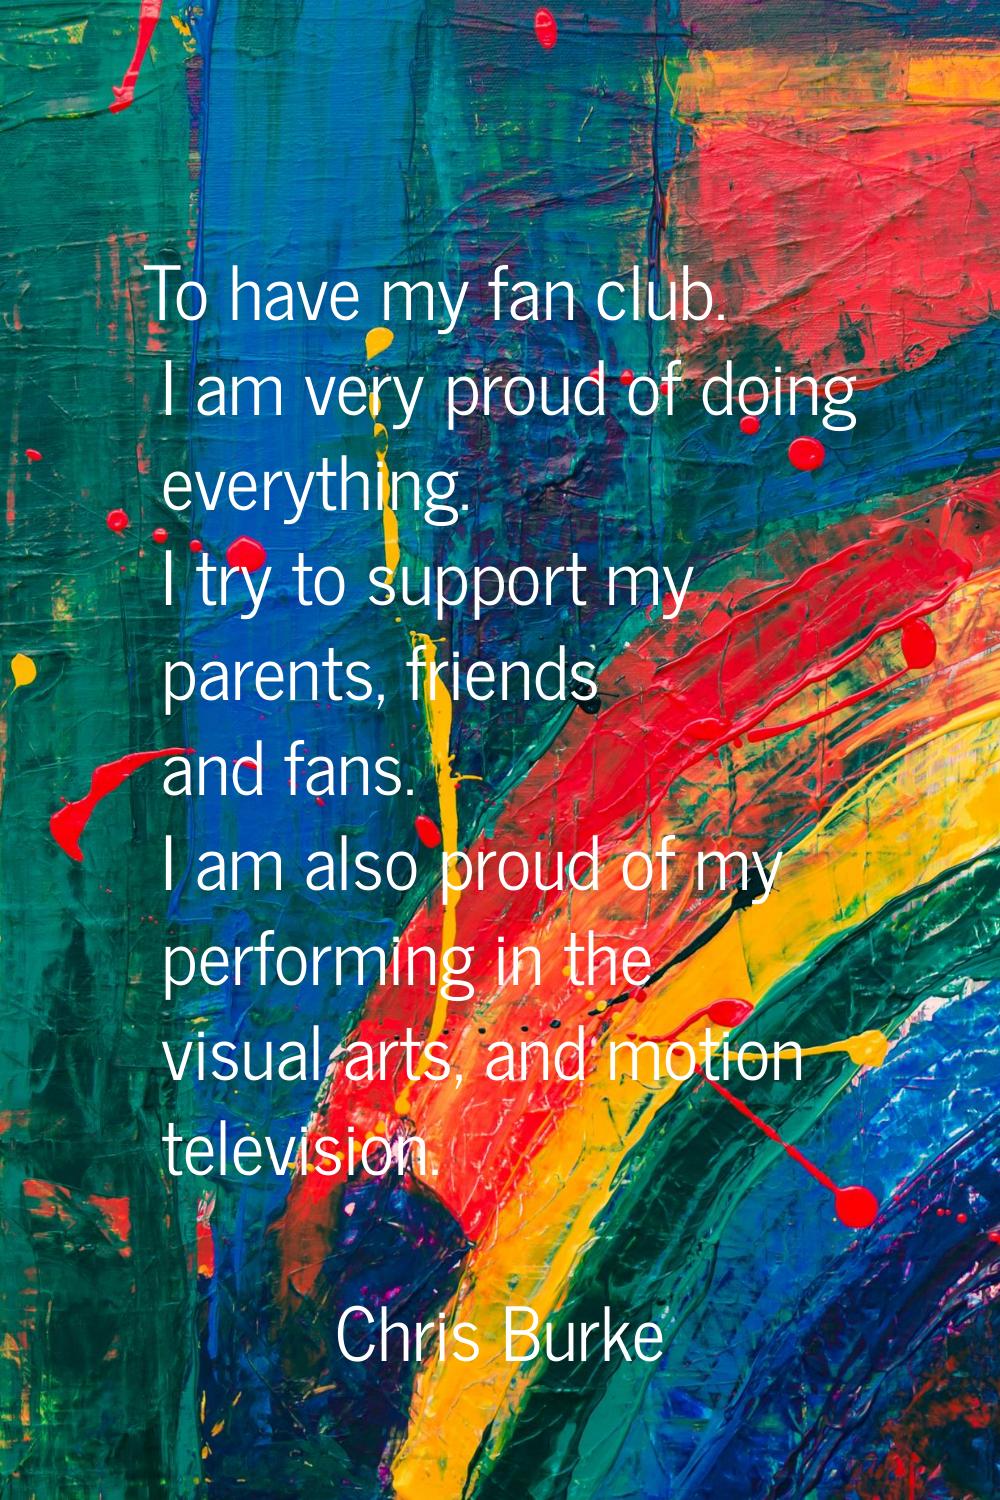 To have my fan club. I am very proud of doing everything. I try to support my parents, friends and 